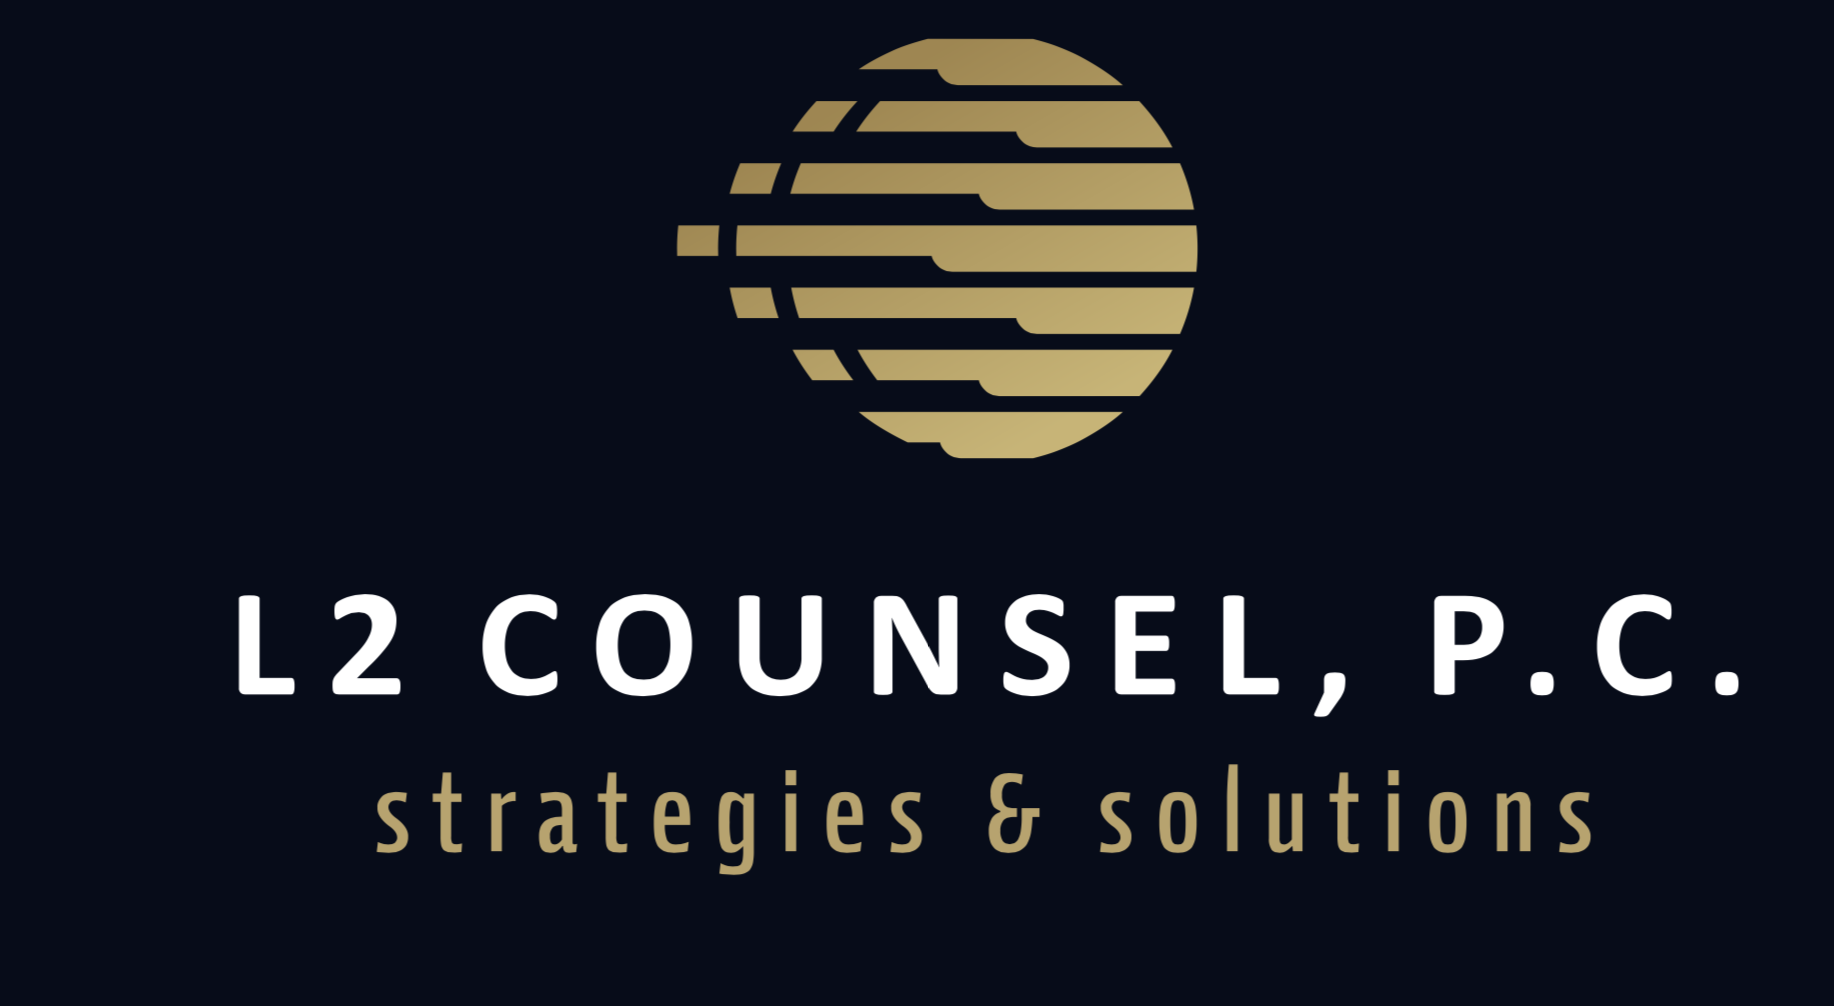 L2 Counsel